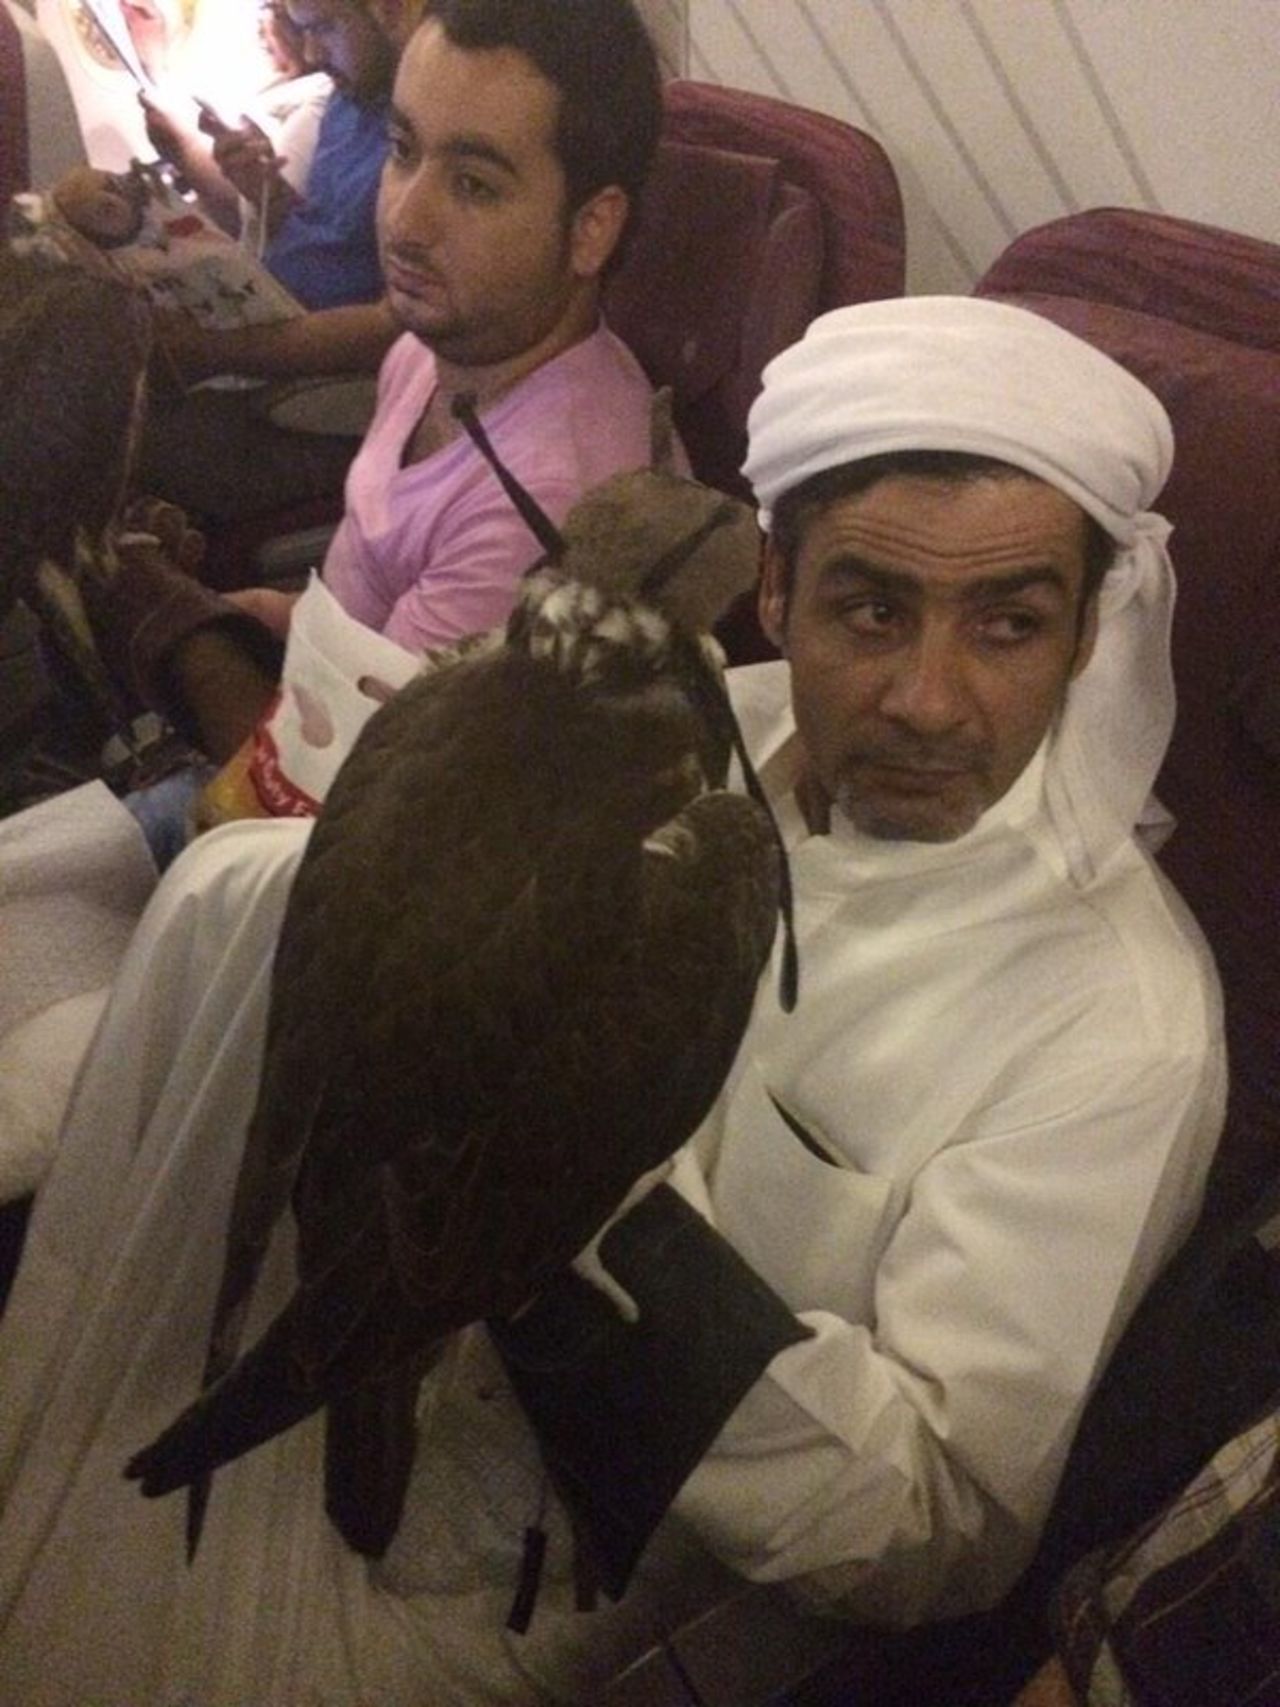 Qatar, Etihad, Emirates and Royal Jordanian Airlines allow falcons in their cabin area.